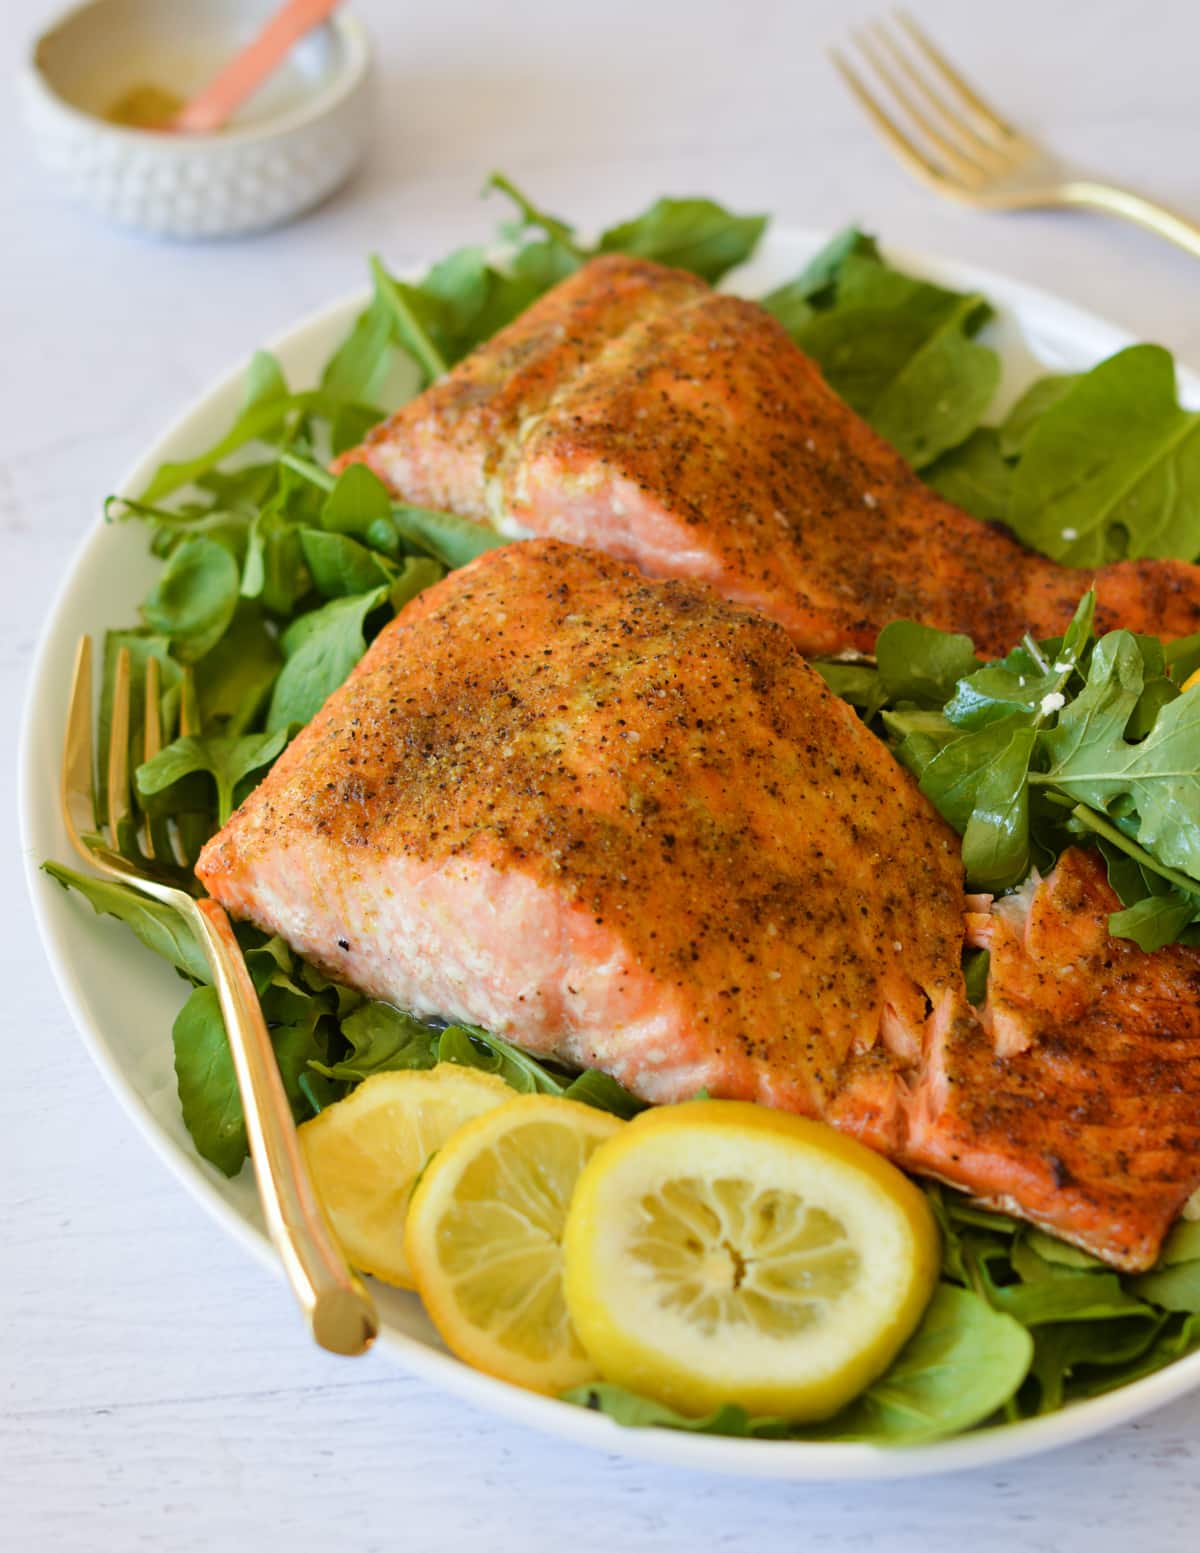 lemon pepper salmon on a bed of mixed greens.